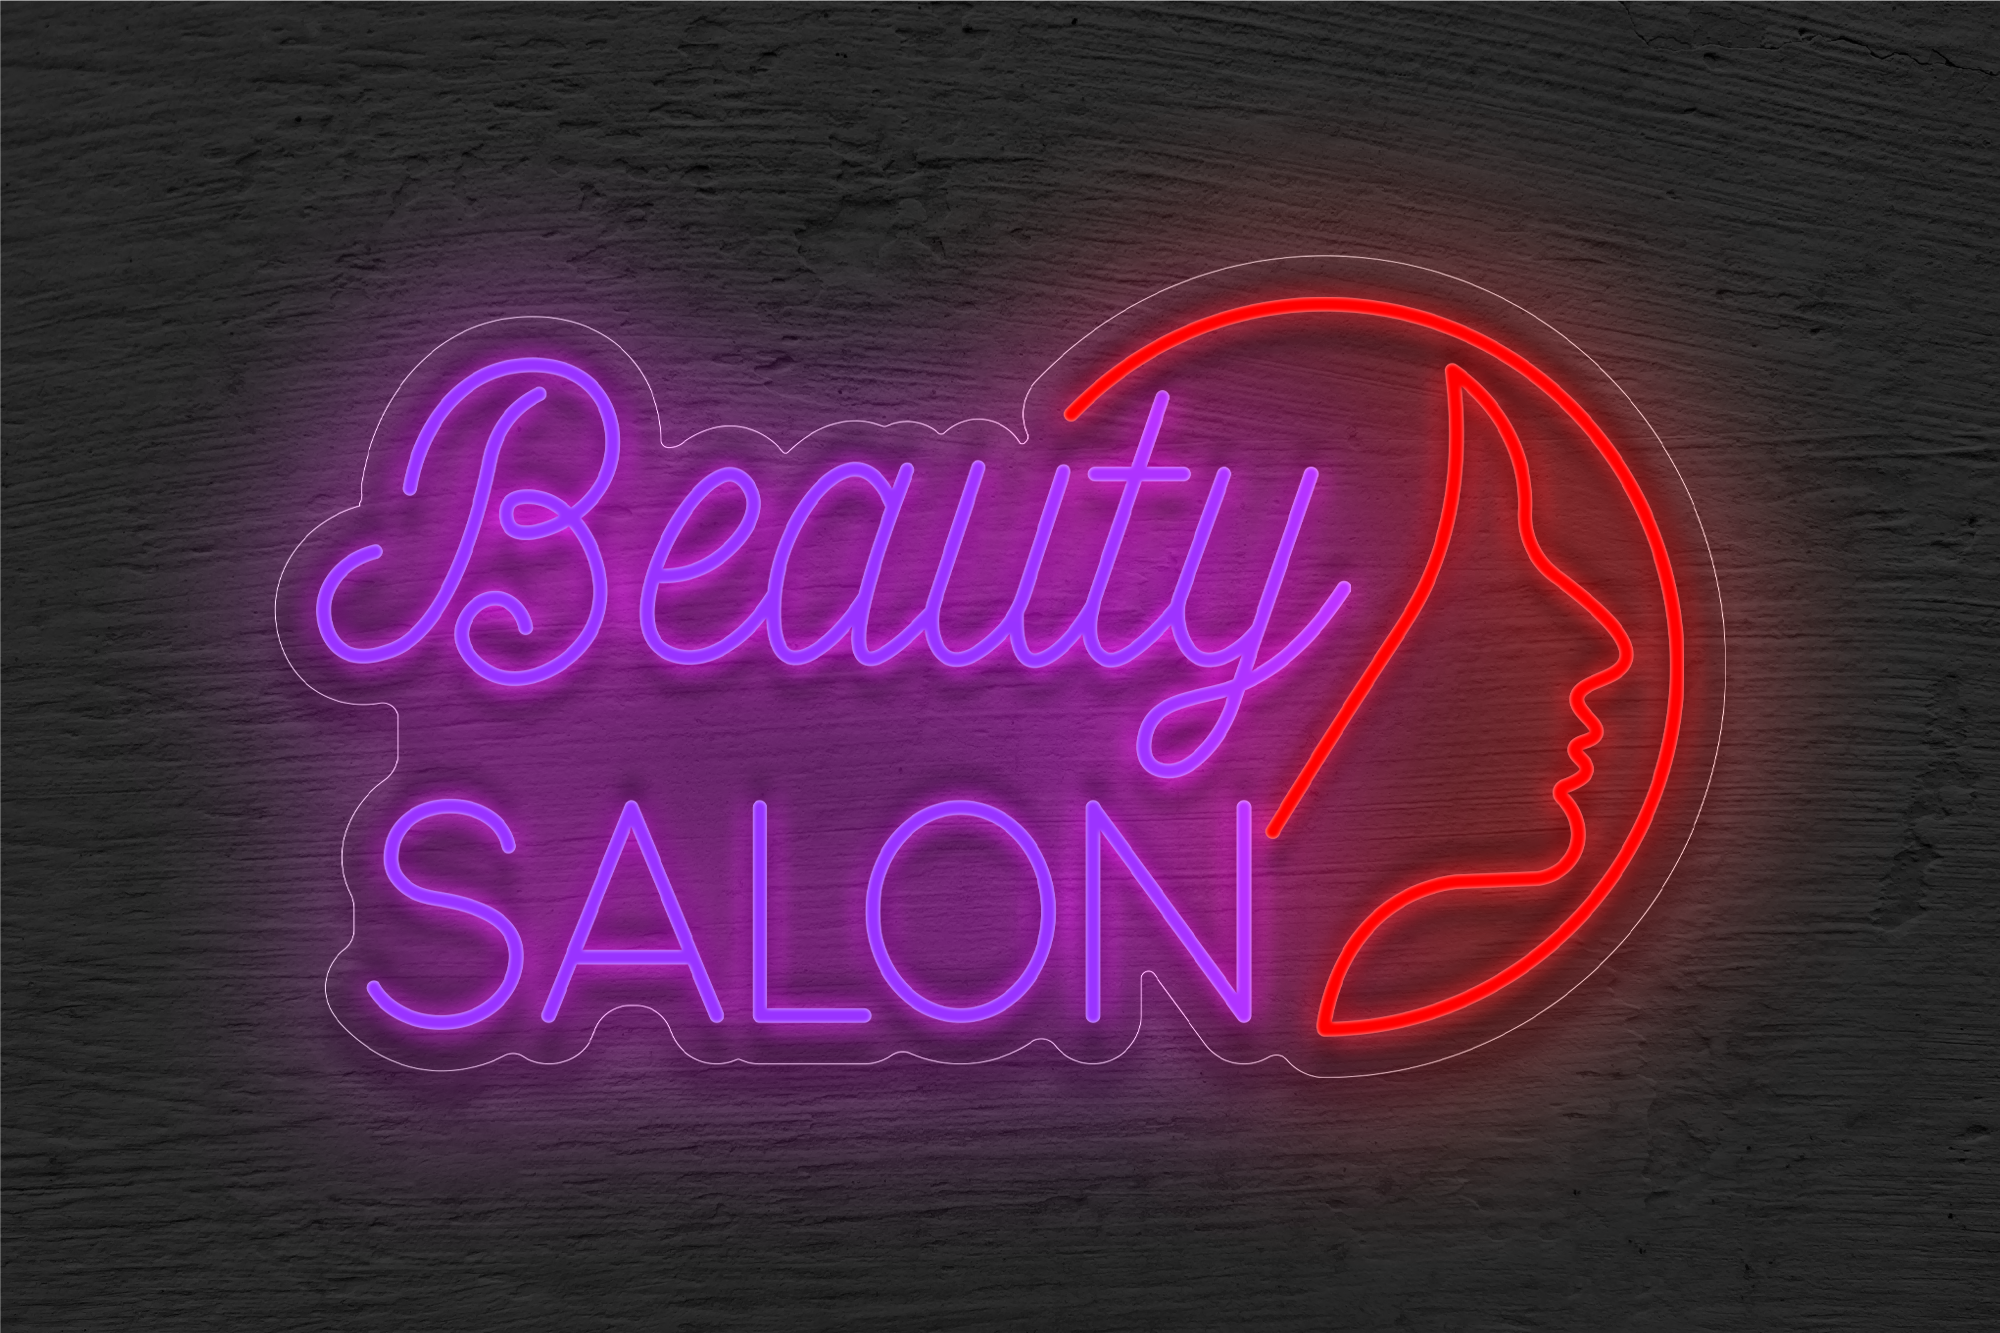 "Beauty Salon" with Face image LED Neon Sign